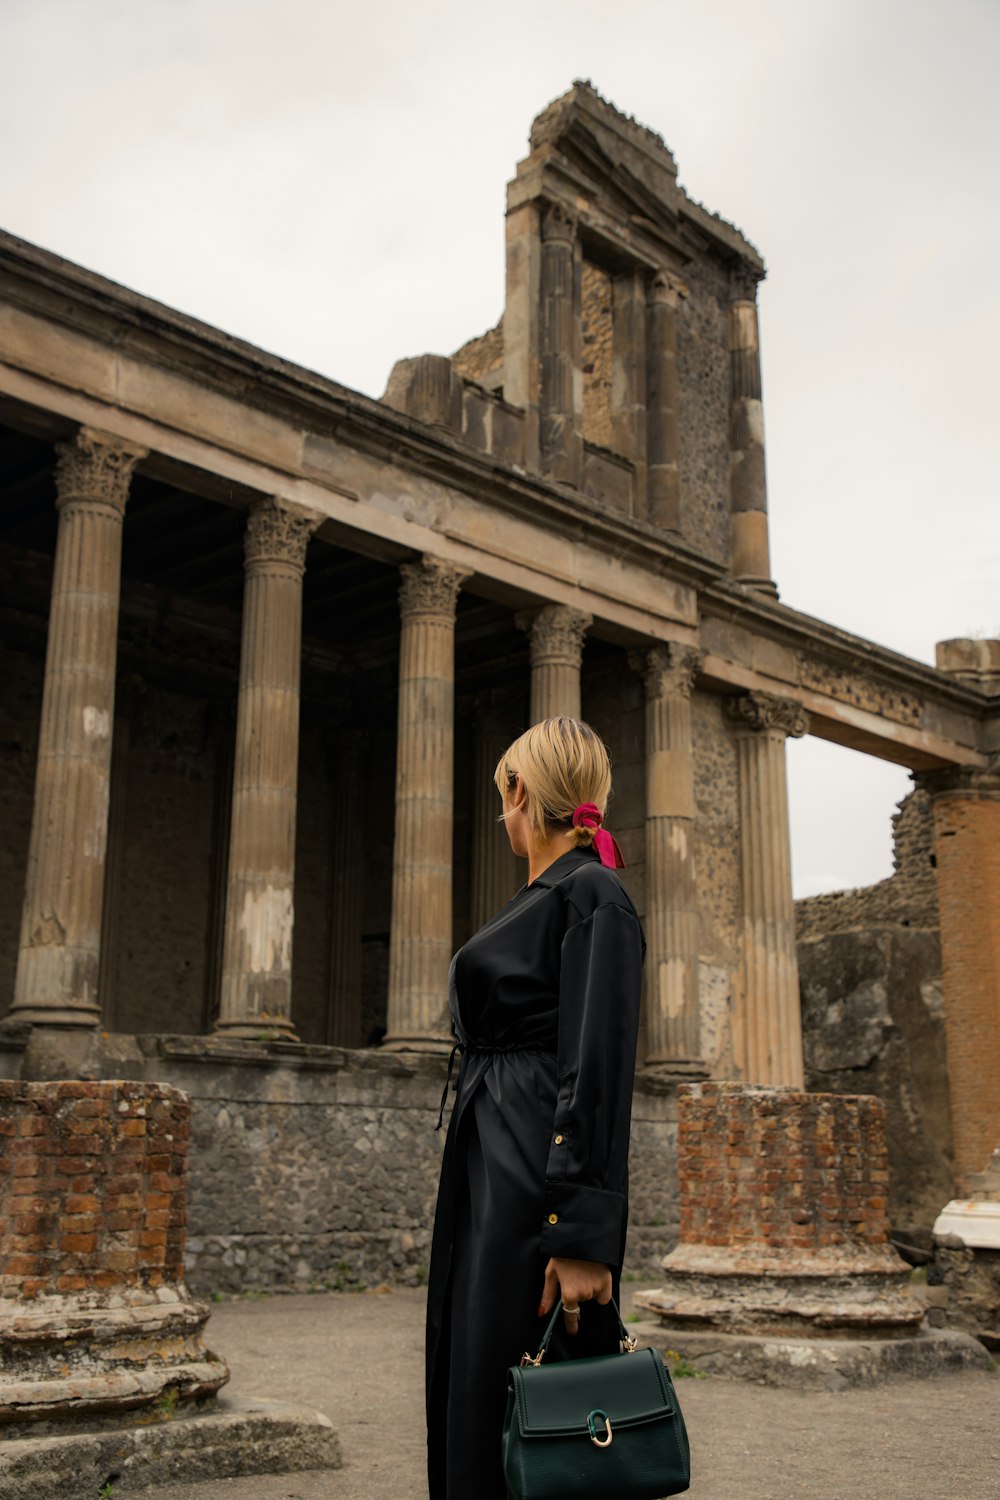 a woman standing in front of an old building